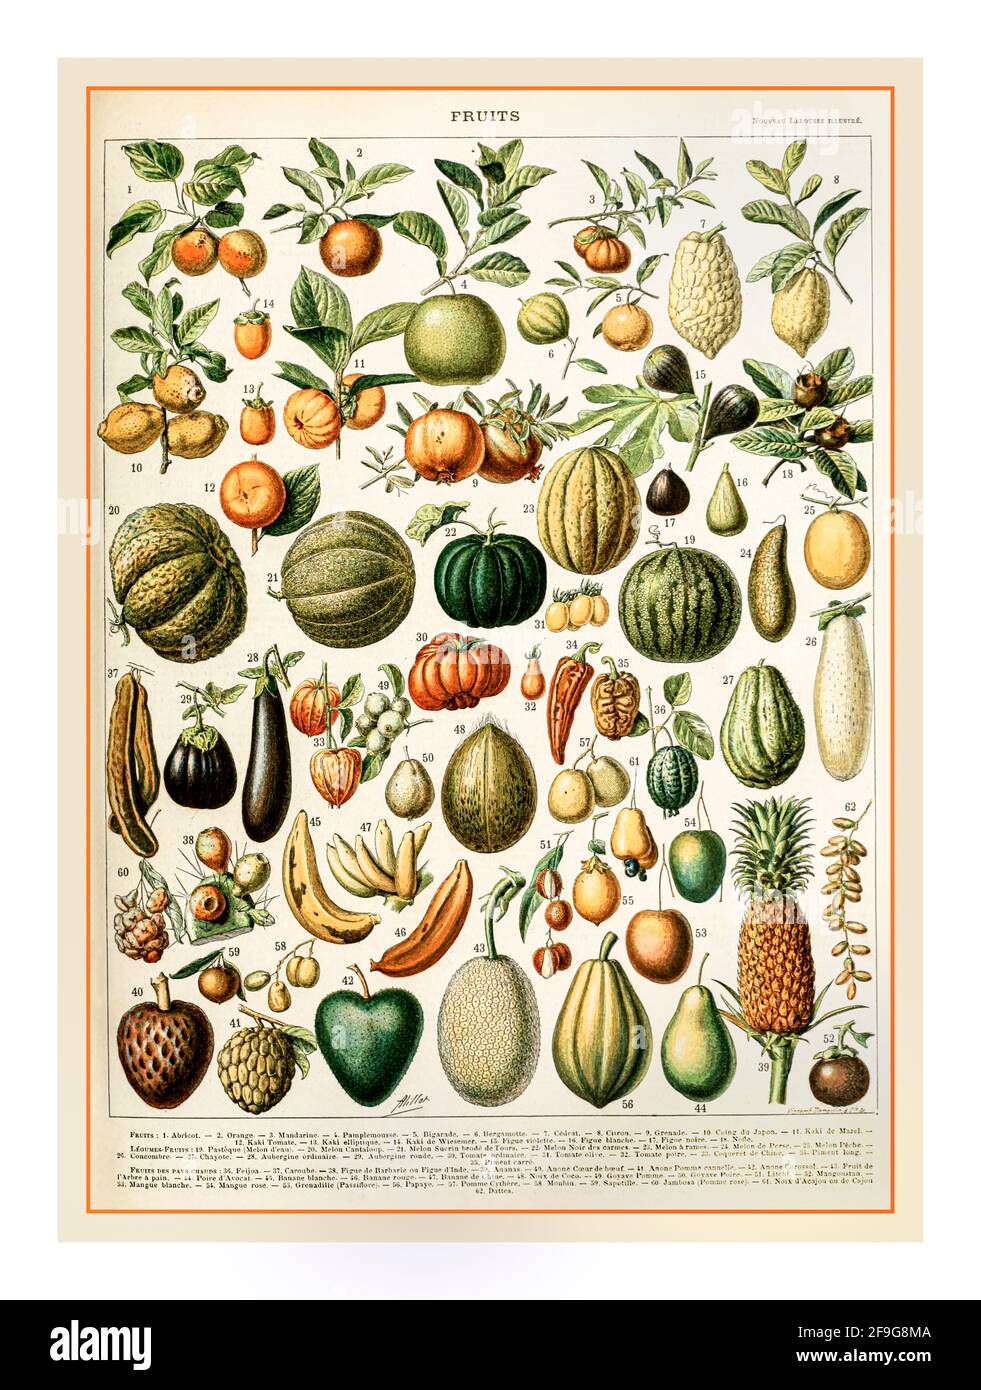 Vintage Larousse Fruits Lithograph illustration 1898 wide variety of fruits and vegetables by Adolphe Millot  Nouveau Larousse Illustree. Stock Photo